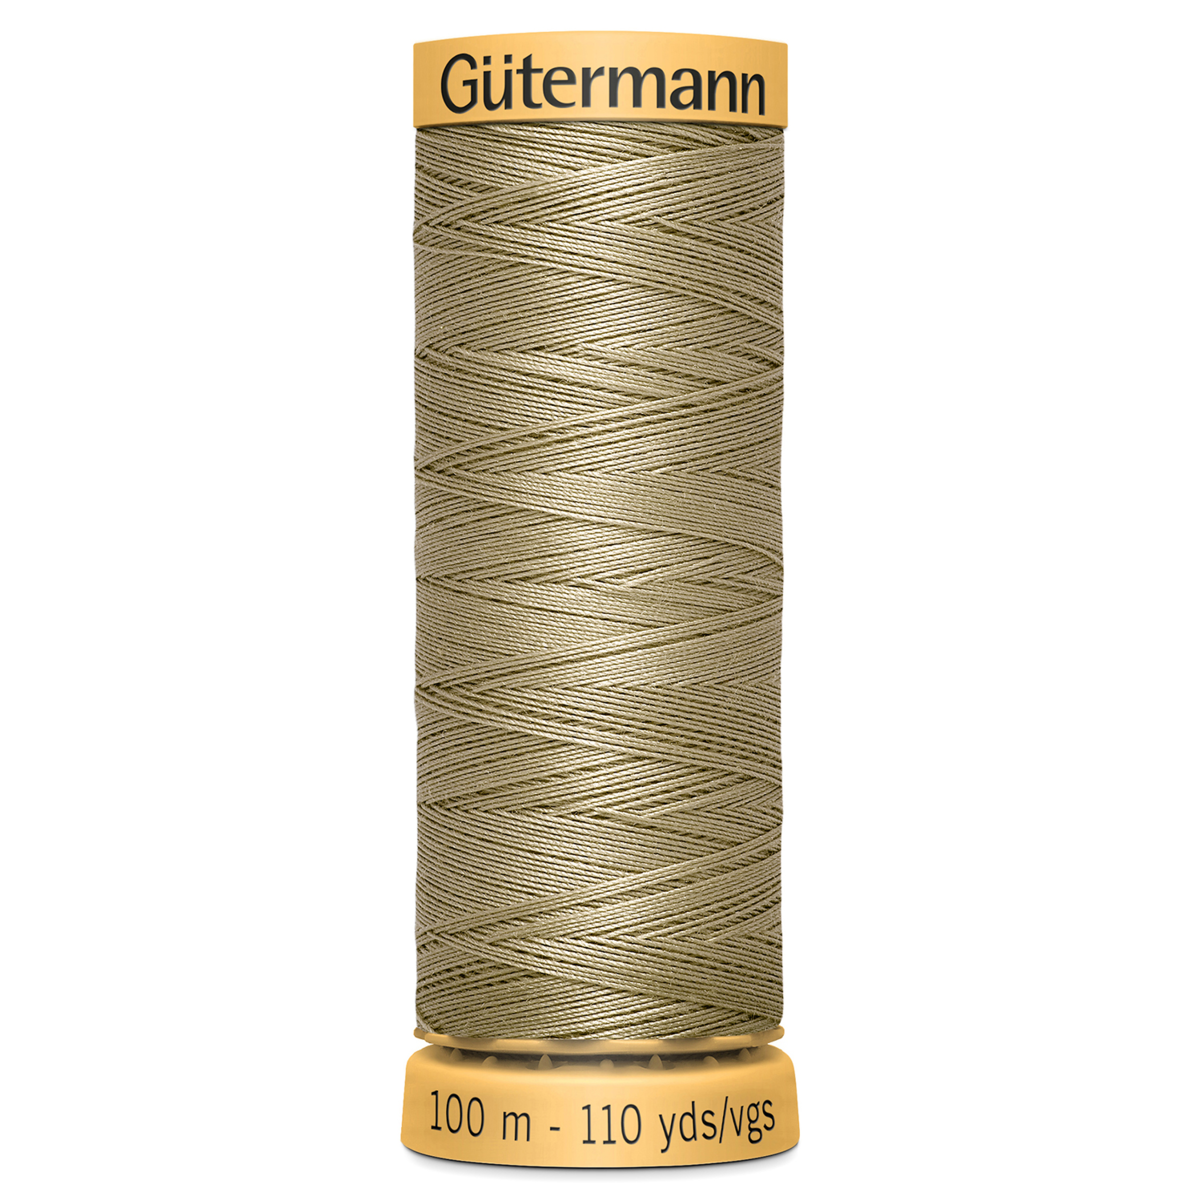 Gutermann Natural Cotton - 816 from Jaycotts Sewing Supplies